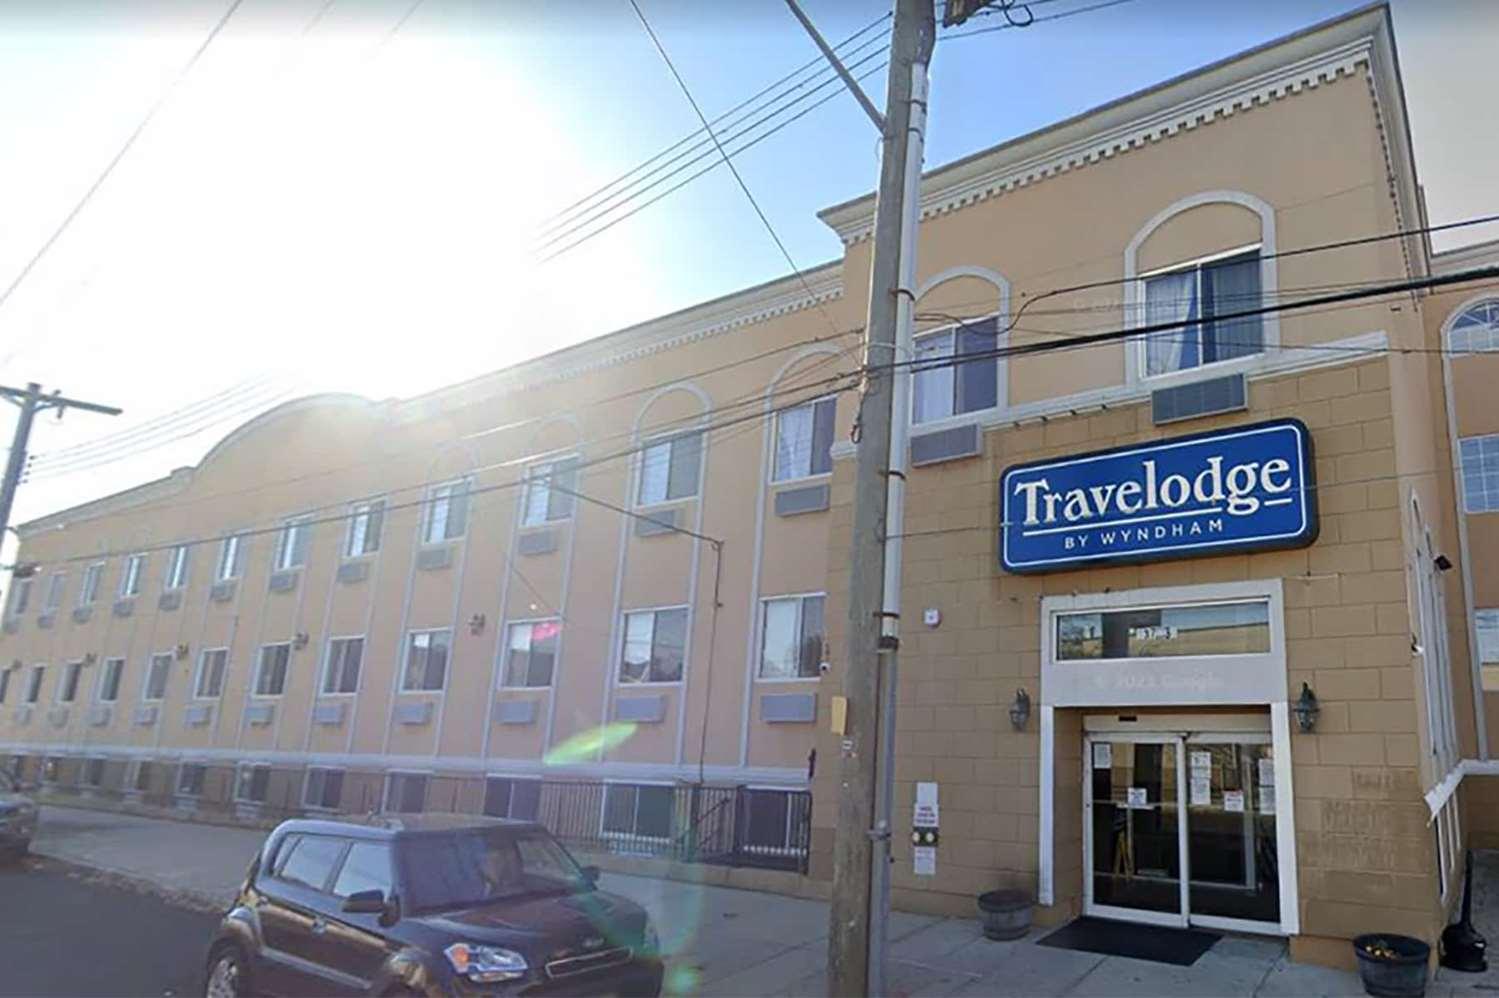 Travelodge by Wyndham Ozone Park in Queens, NY